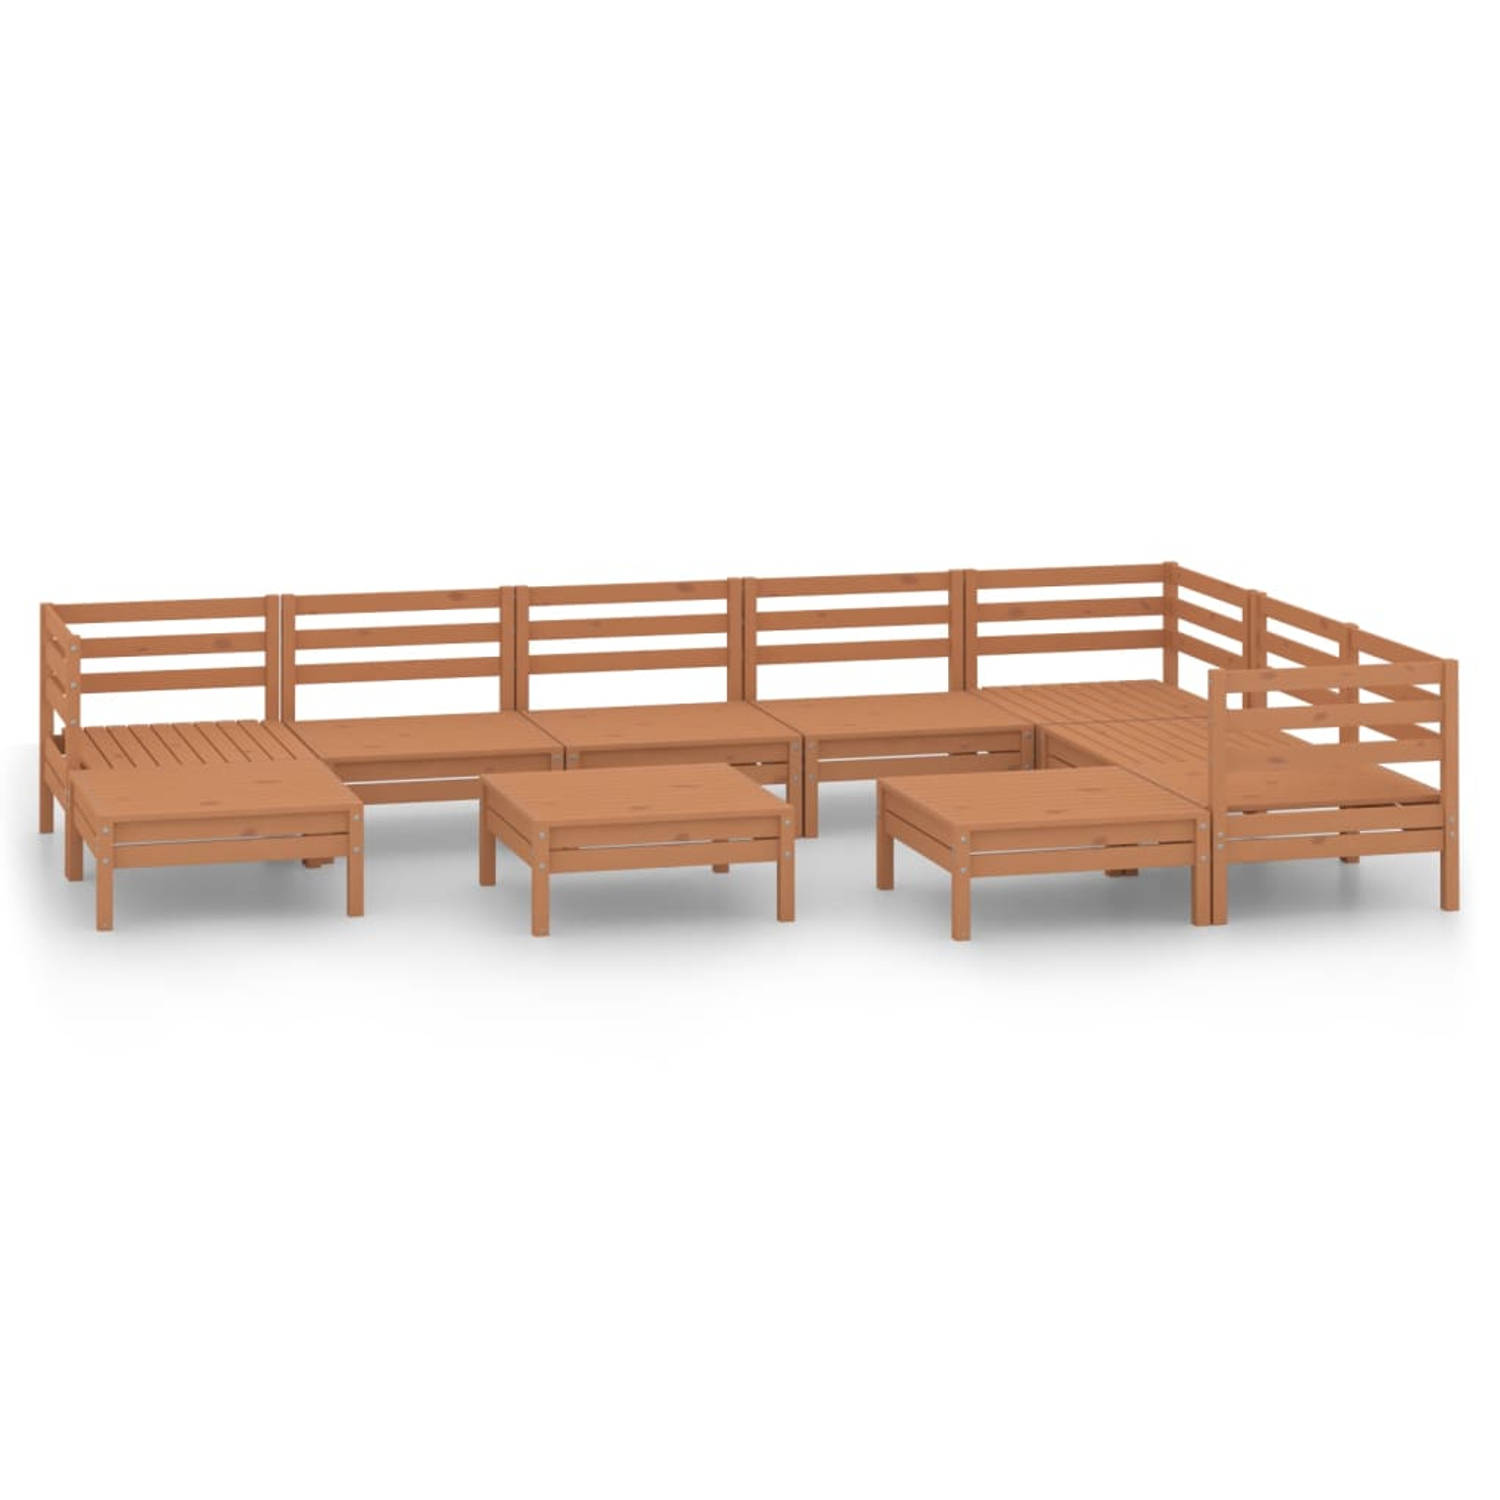 The Living Store 10-delige Loungeset massief grenenhout honingbruin - Tuinset